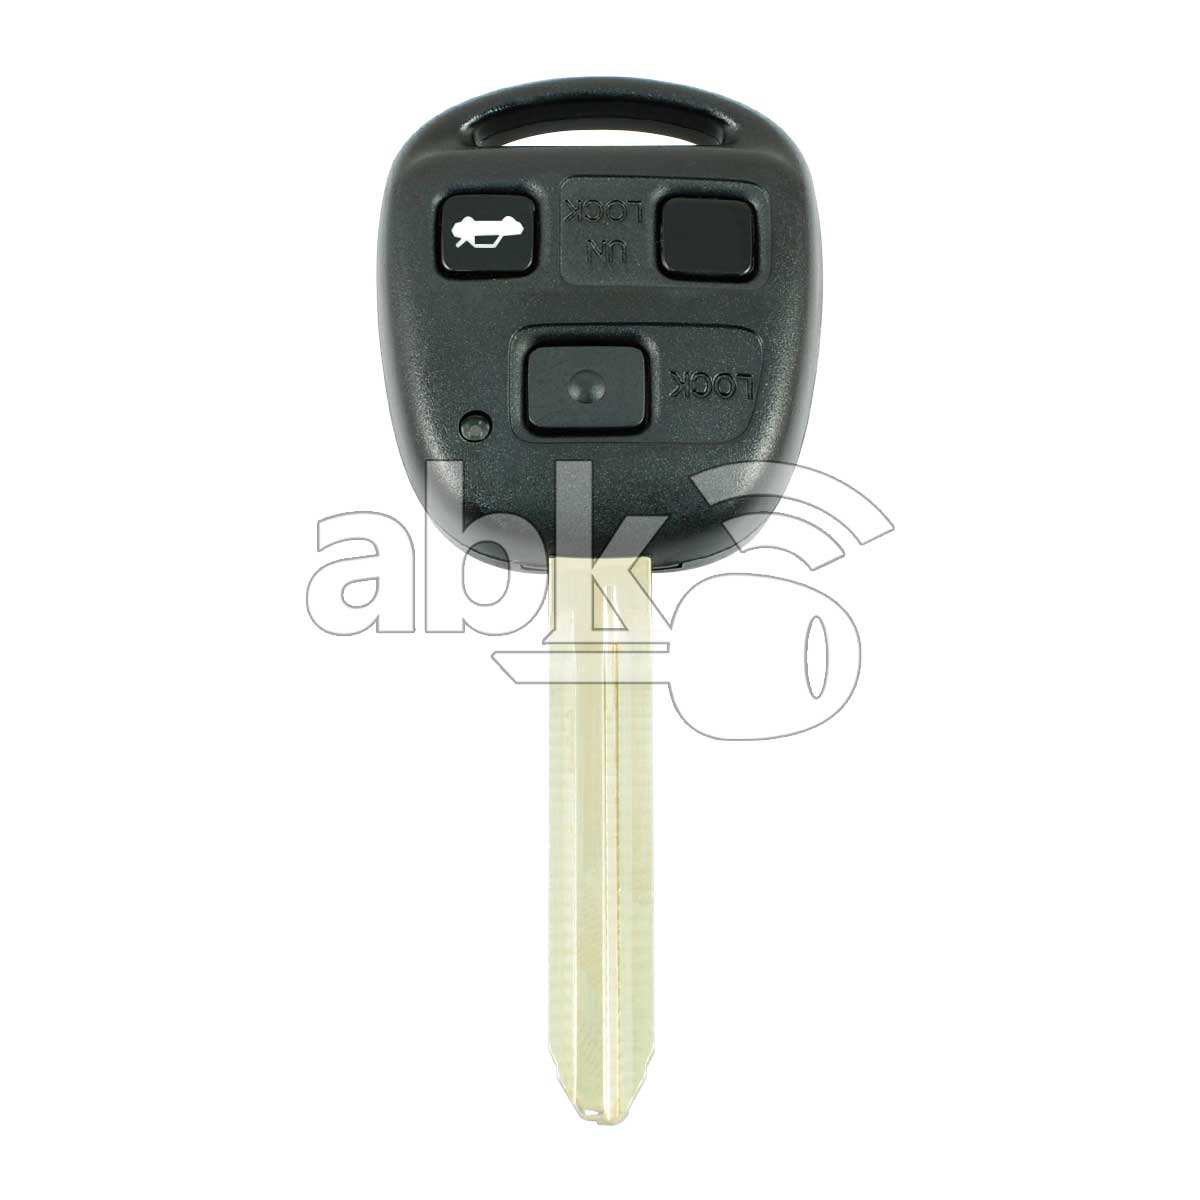 Genuine Toyota Camry 2003+ Key Head Remote 3Buttons 305MHz TOY43 89070-06040 89070-06041 - ABK-166 -